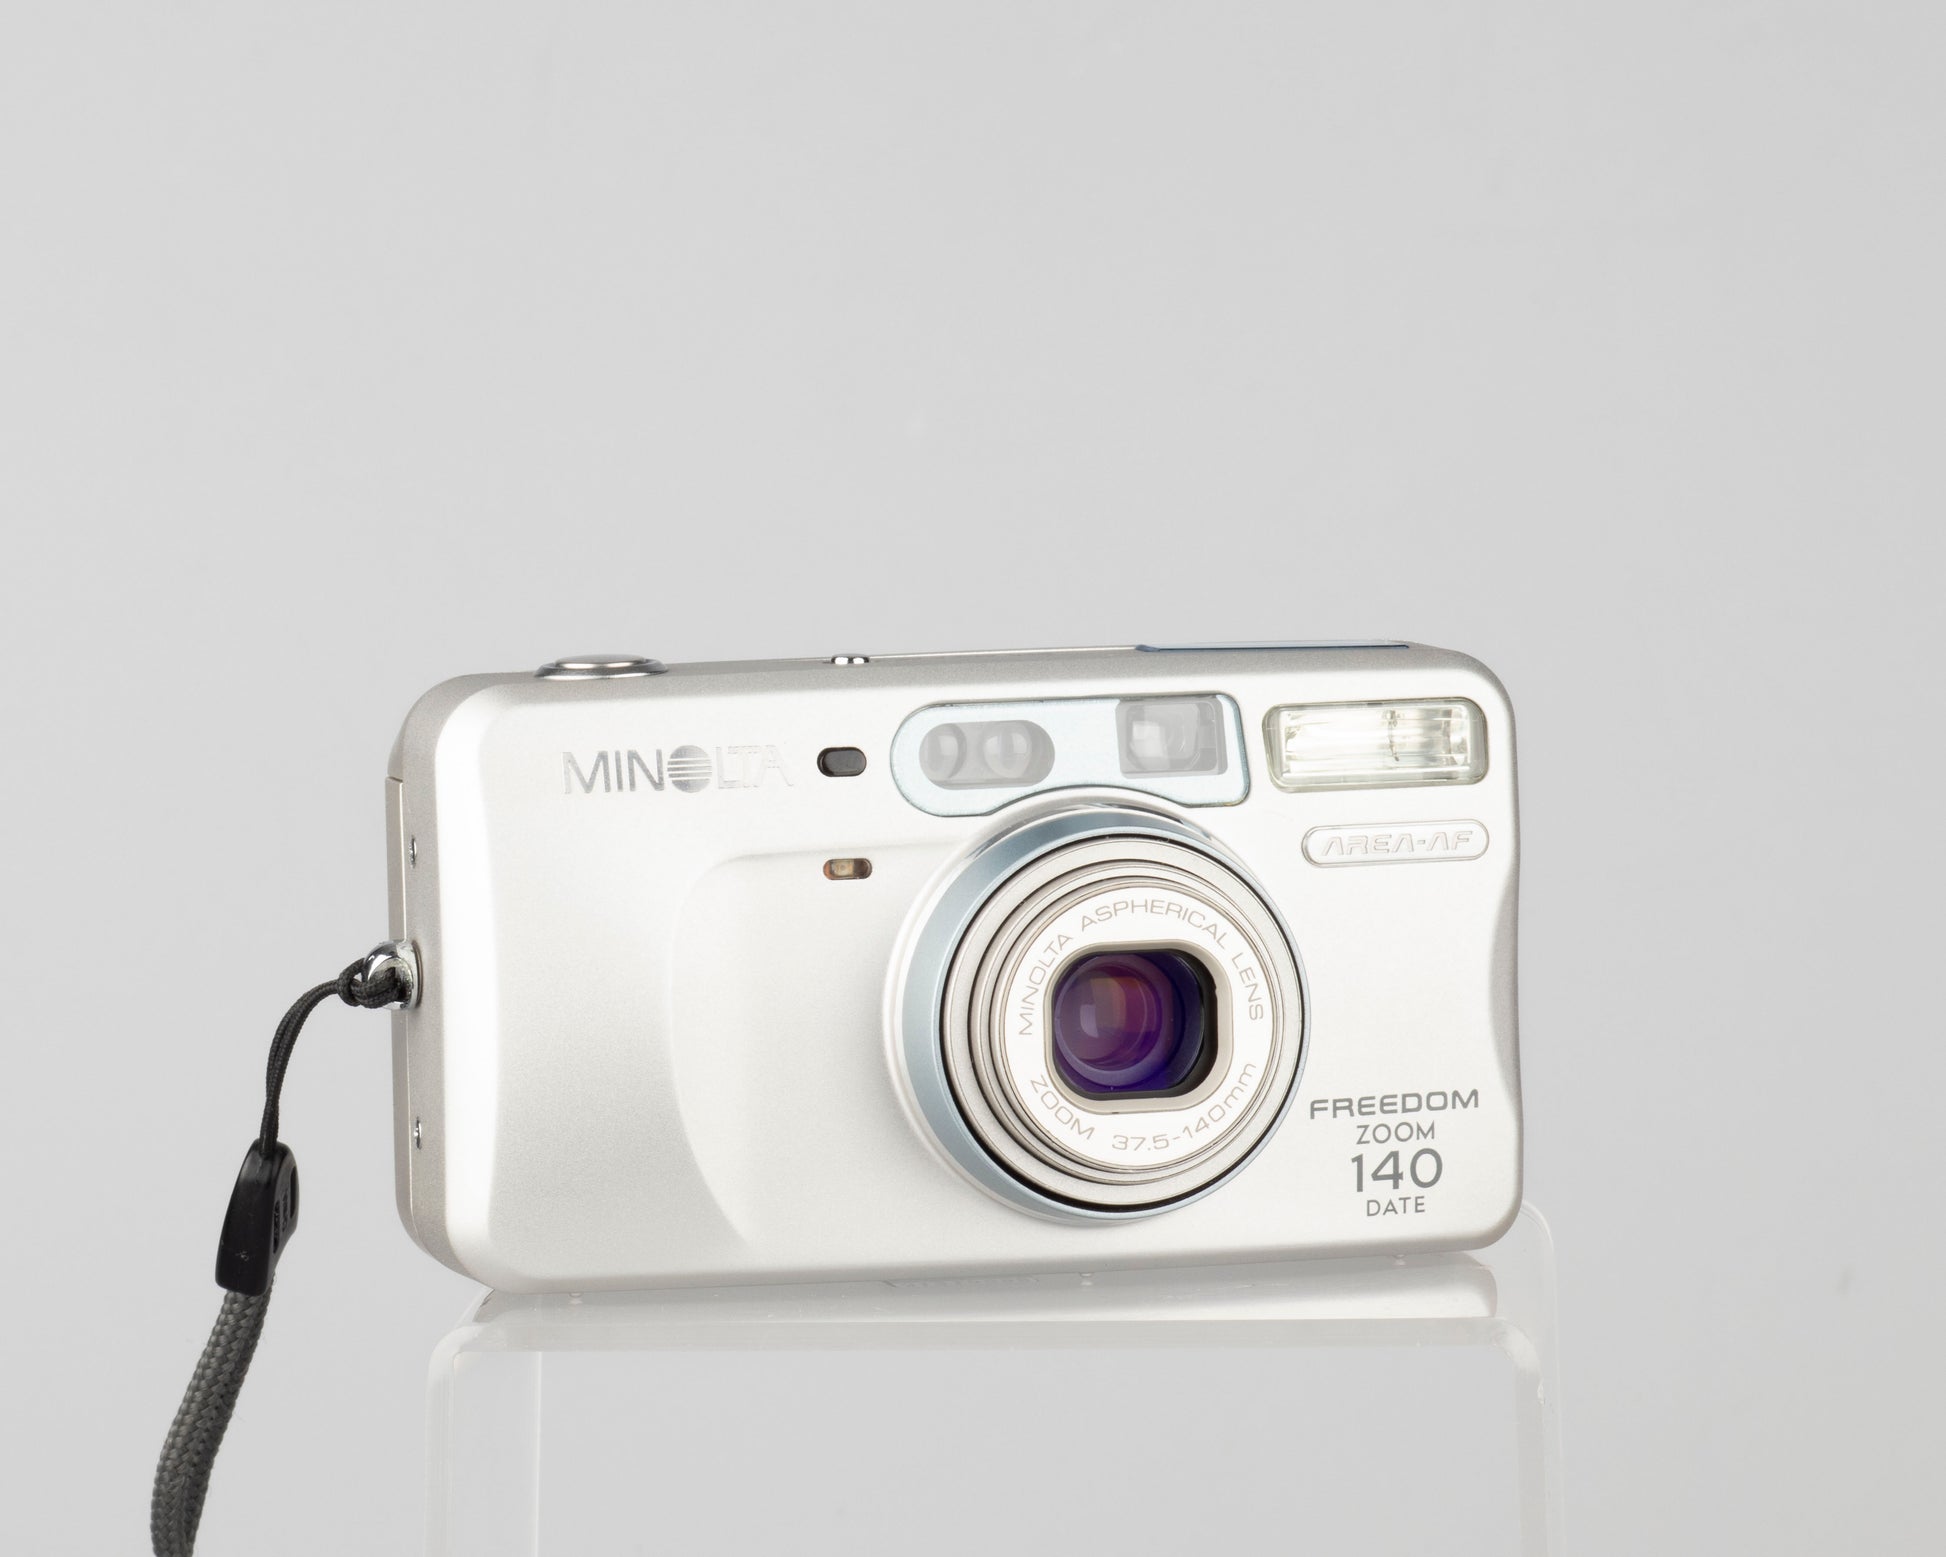 The Minolta Freedom Zoom 140 Date is a sophisticated compact 35mm point-and-shoot from 2001 featuring the innovative 'Area AF' autofocusing design